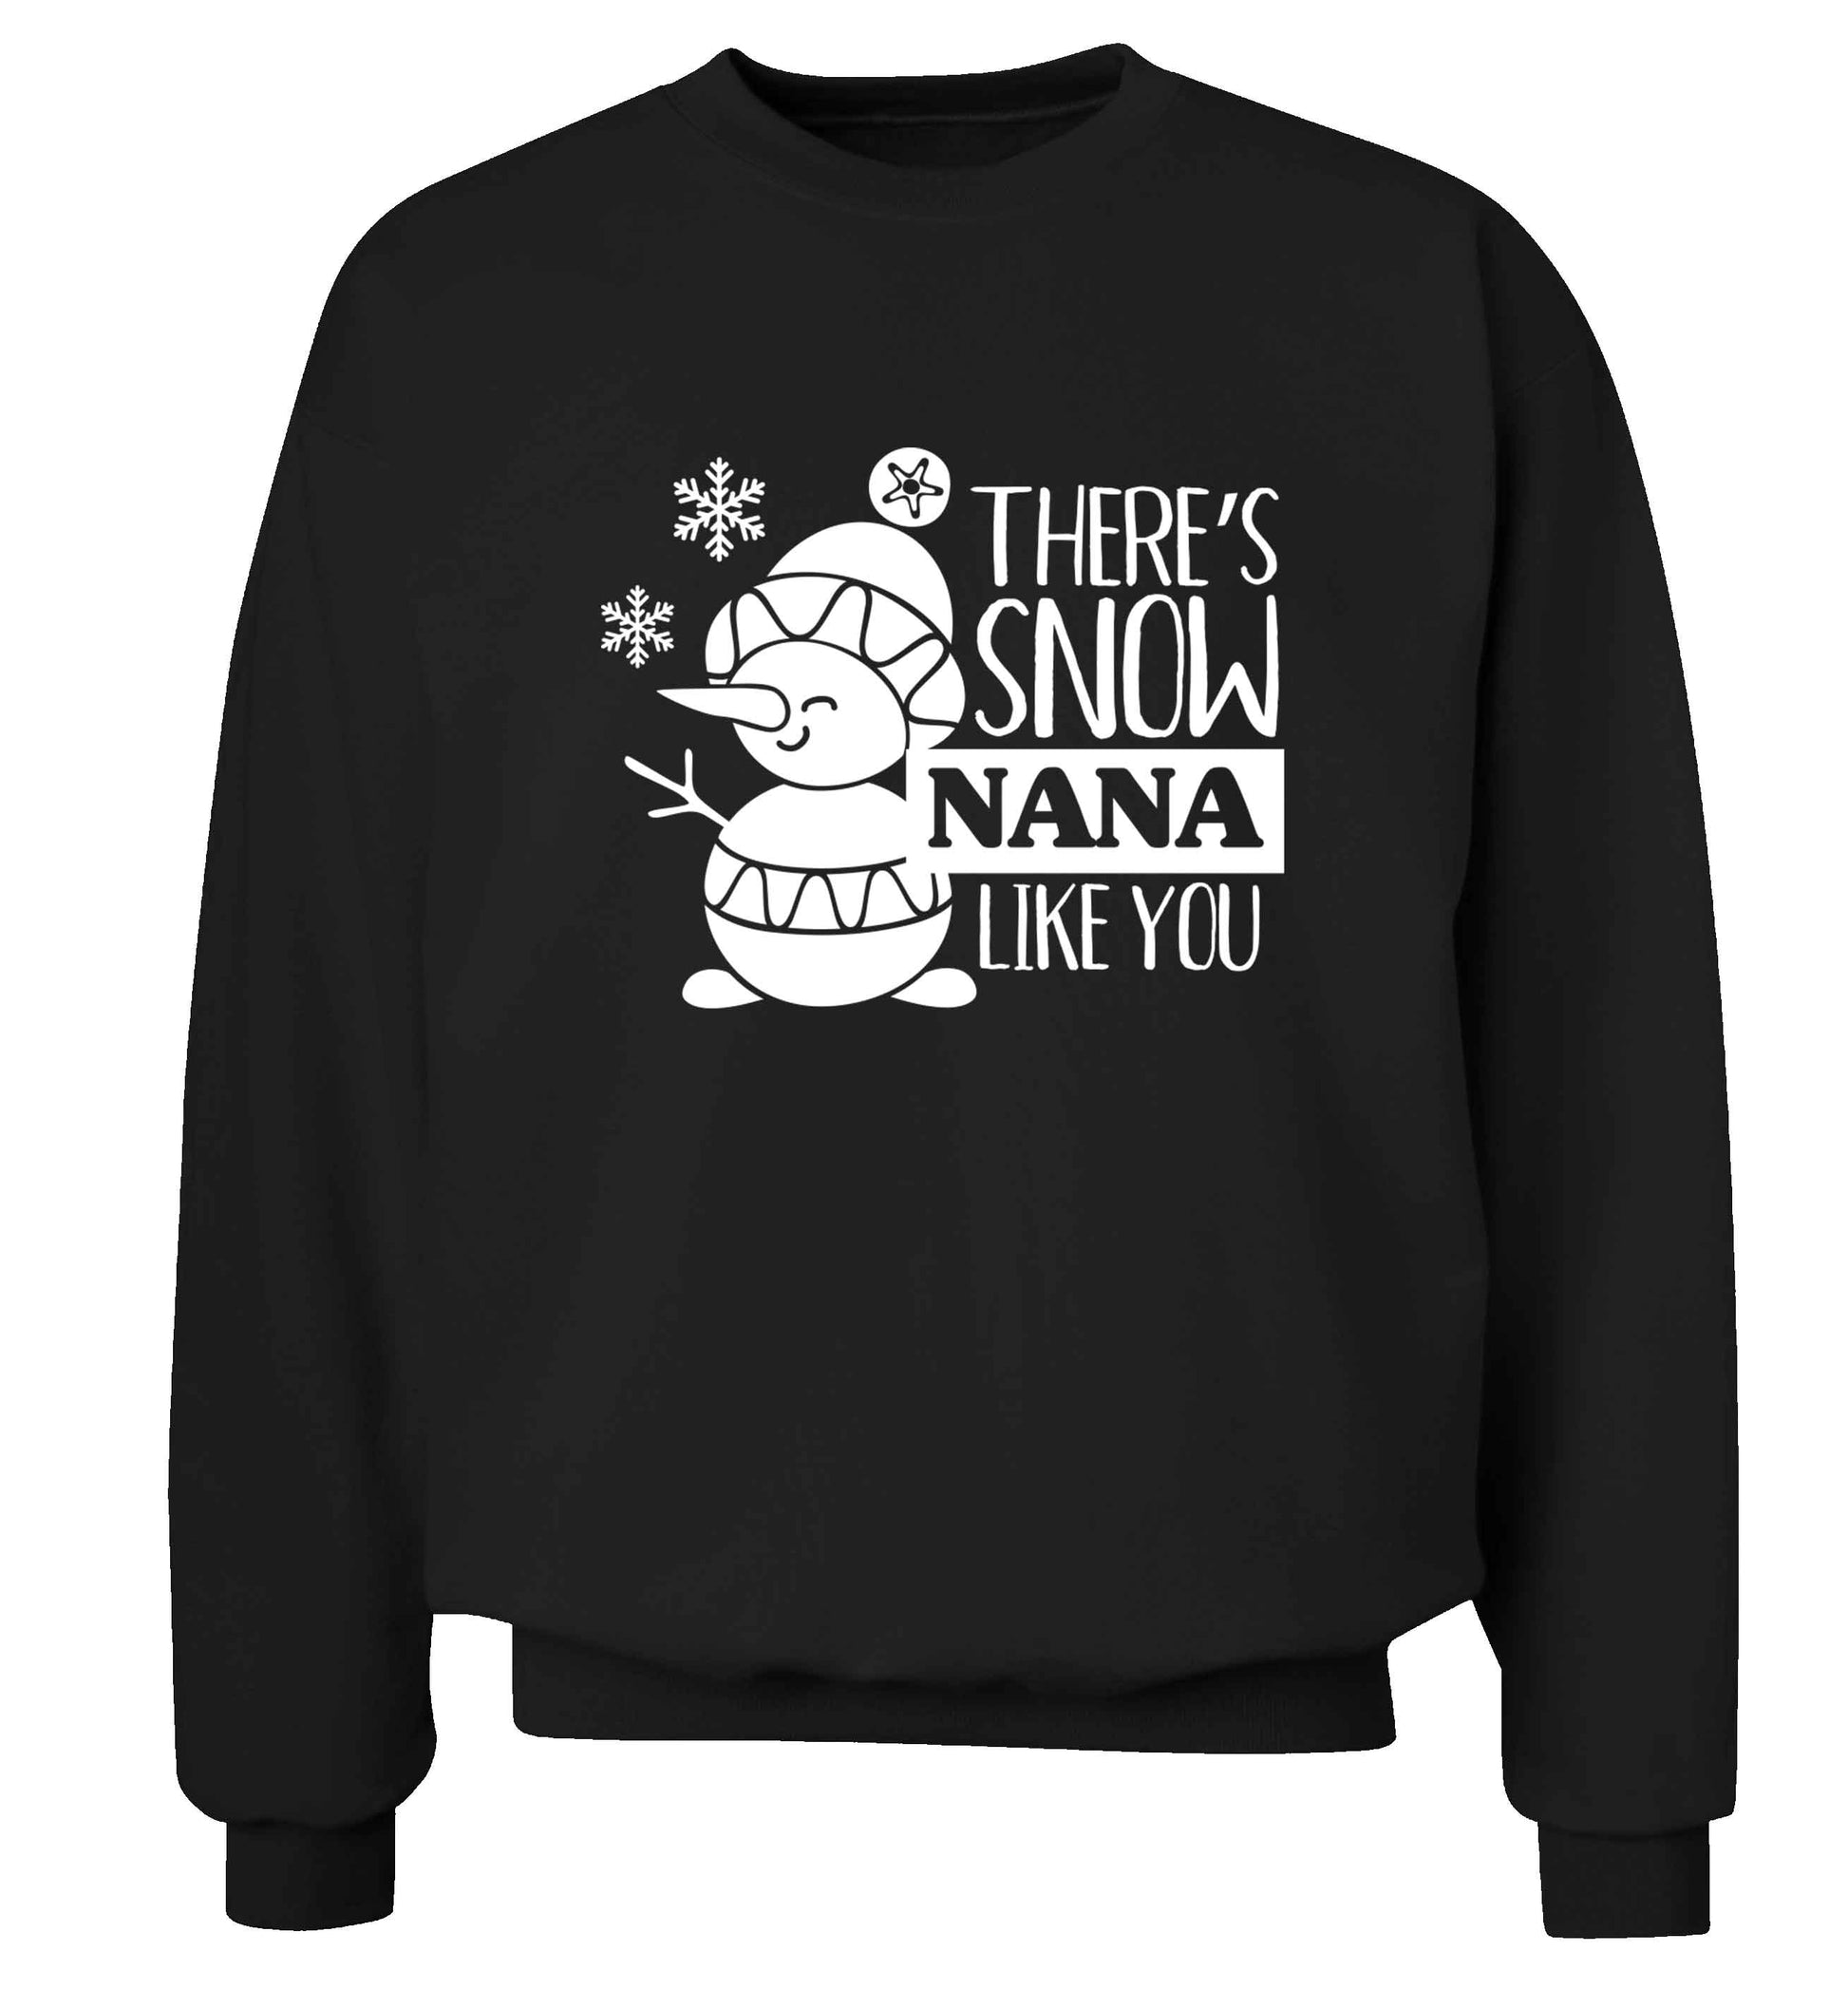 There's snow nana like you adult's unisex black sweater 2XL